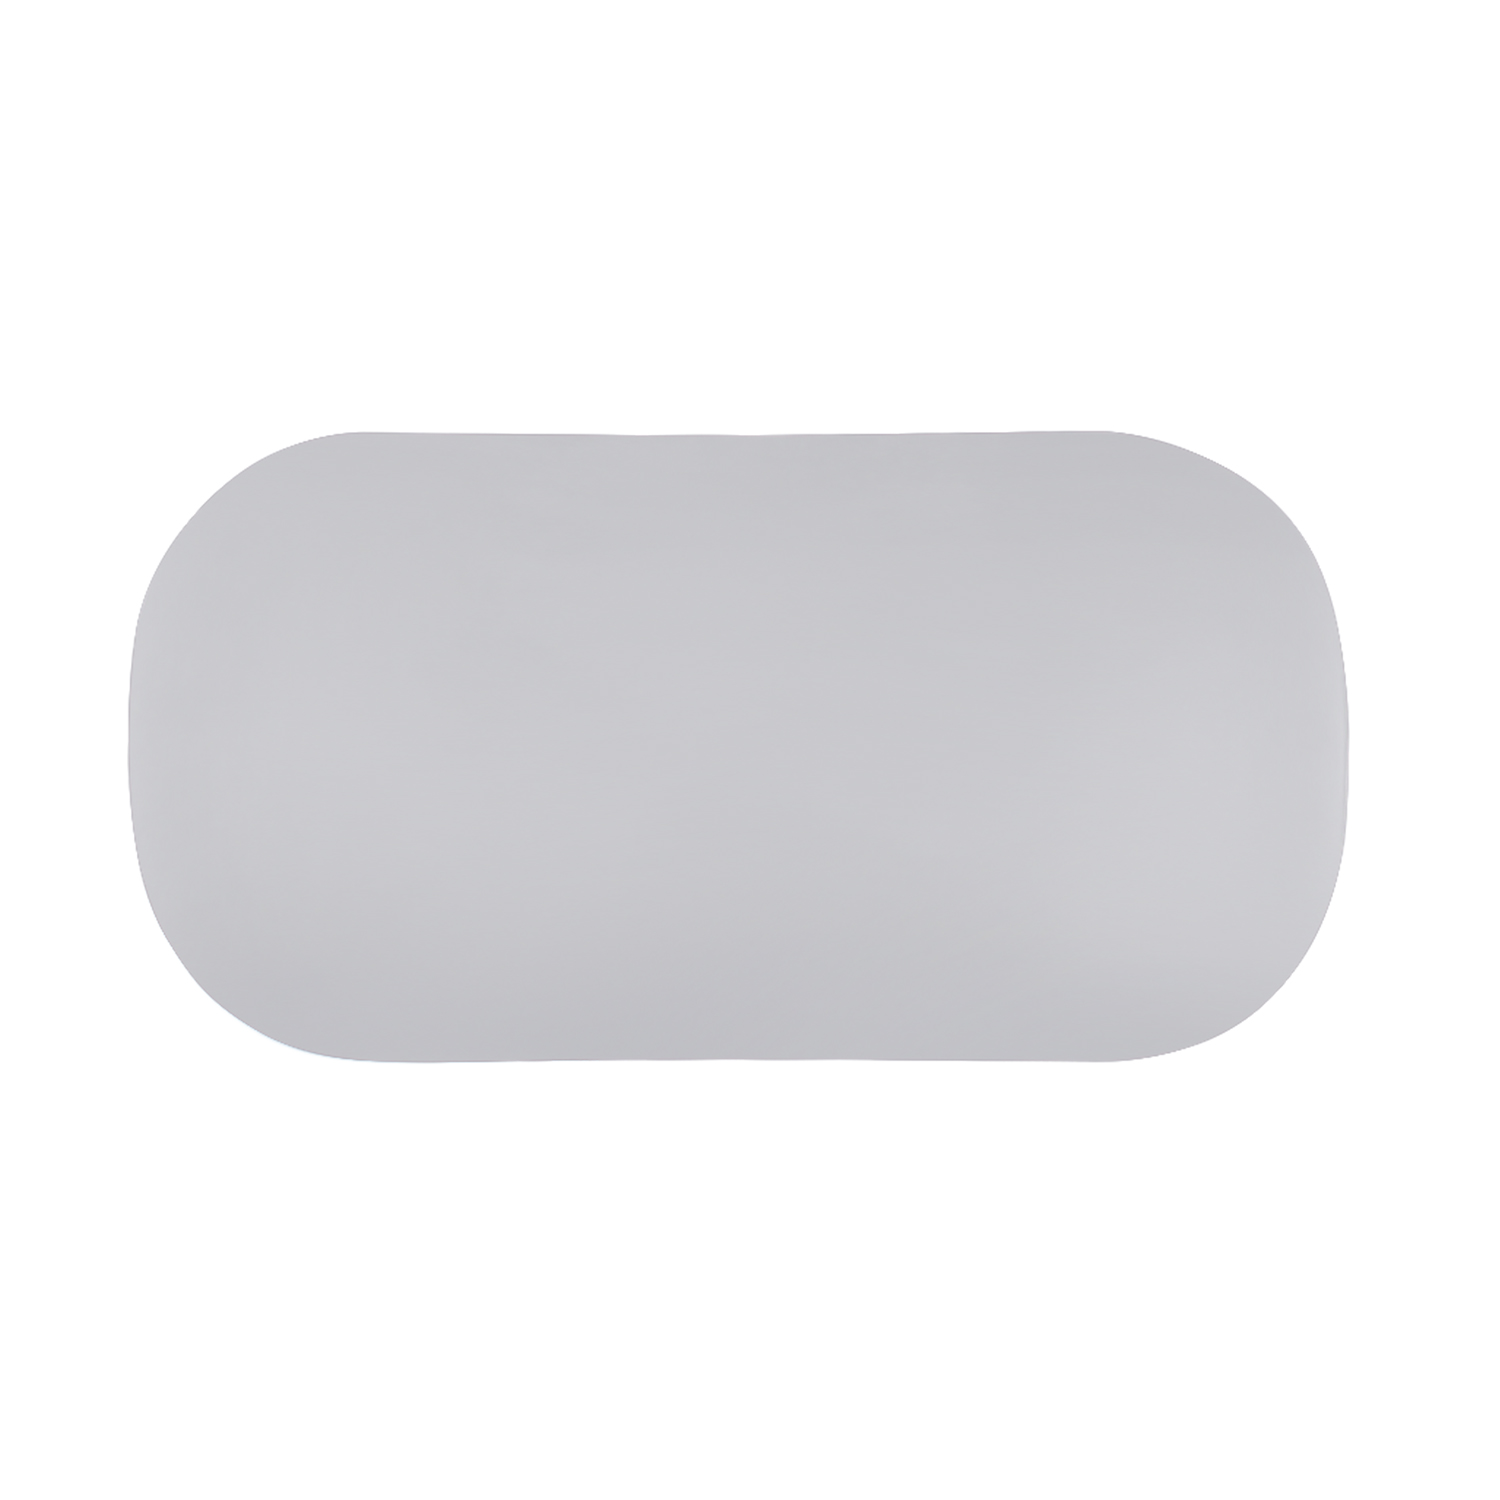 

BUBM PUST-A Leather Silicone Hand Rest Ergonomic Wrist Pad Non-slip Game Pad Memory Foam Mouse Pad